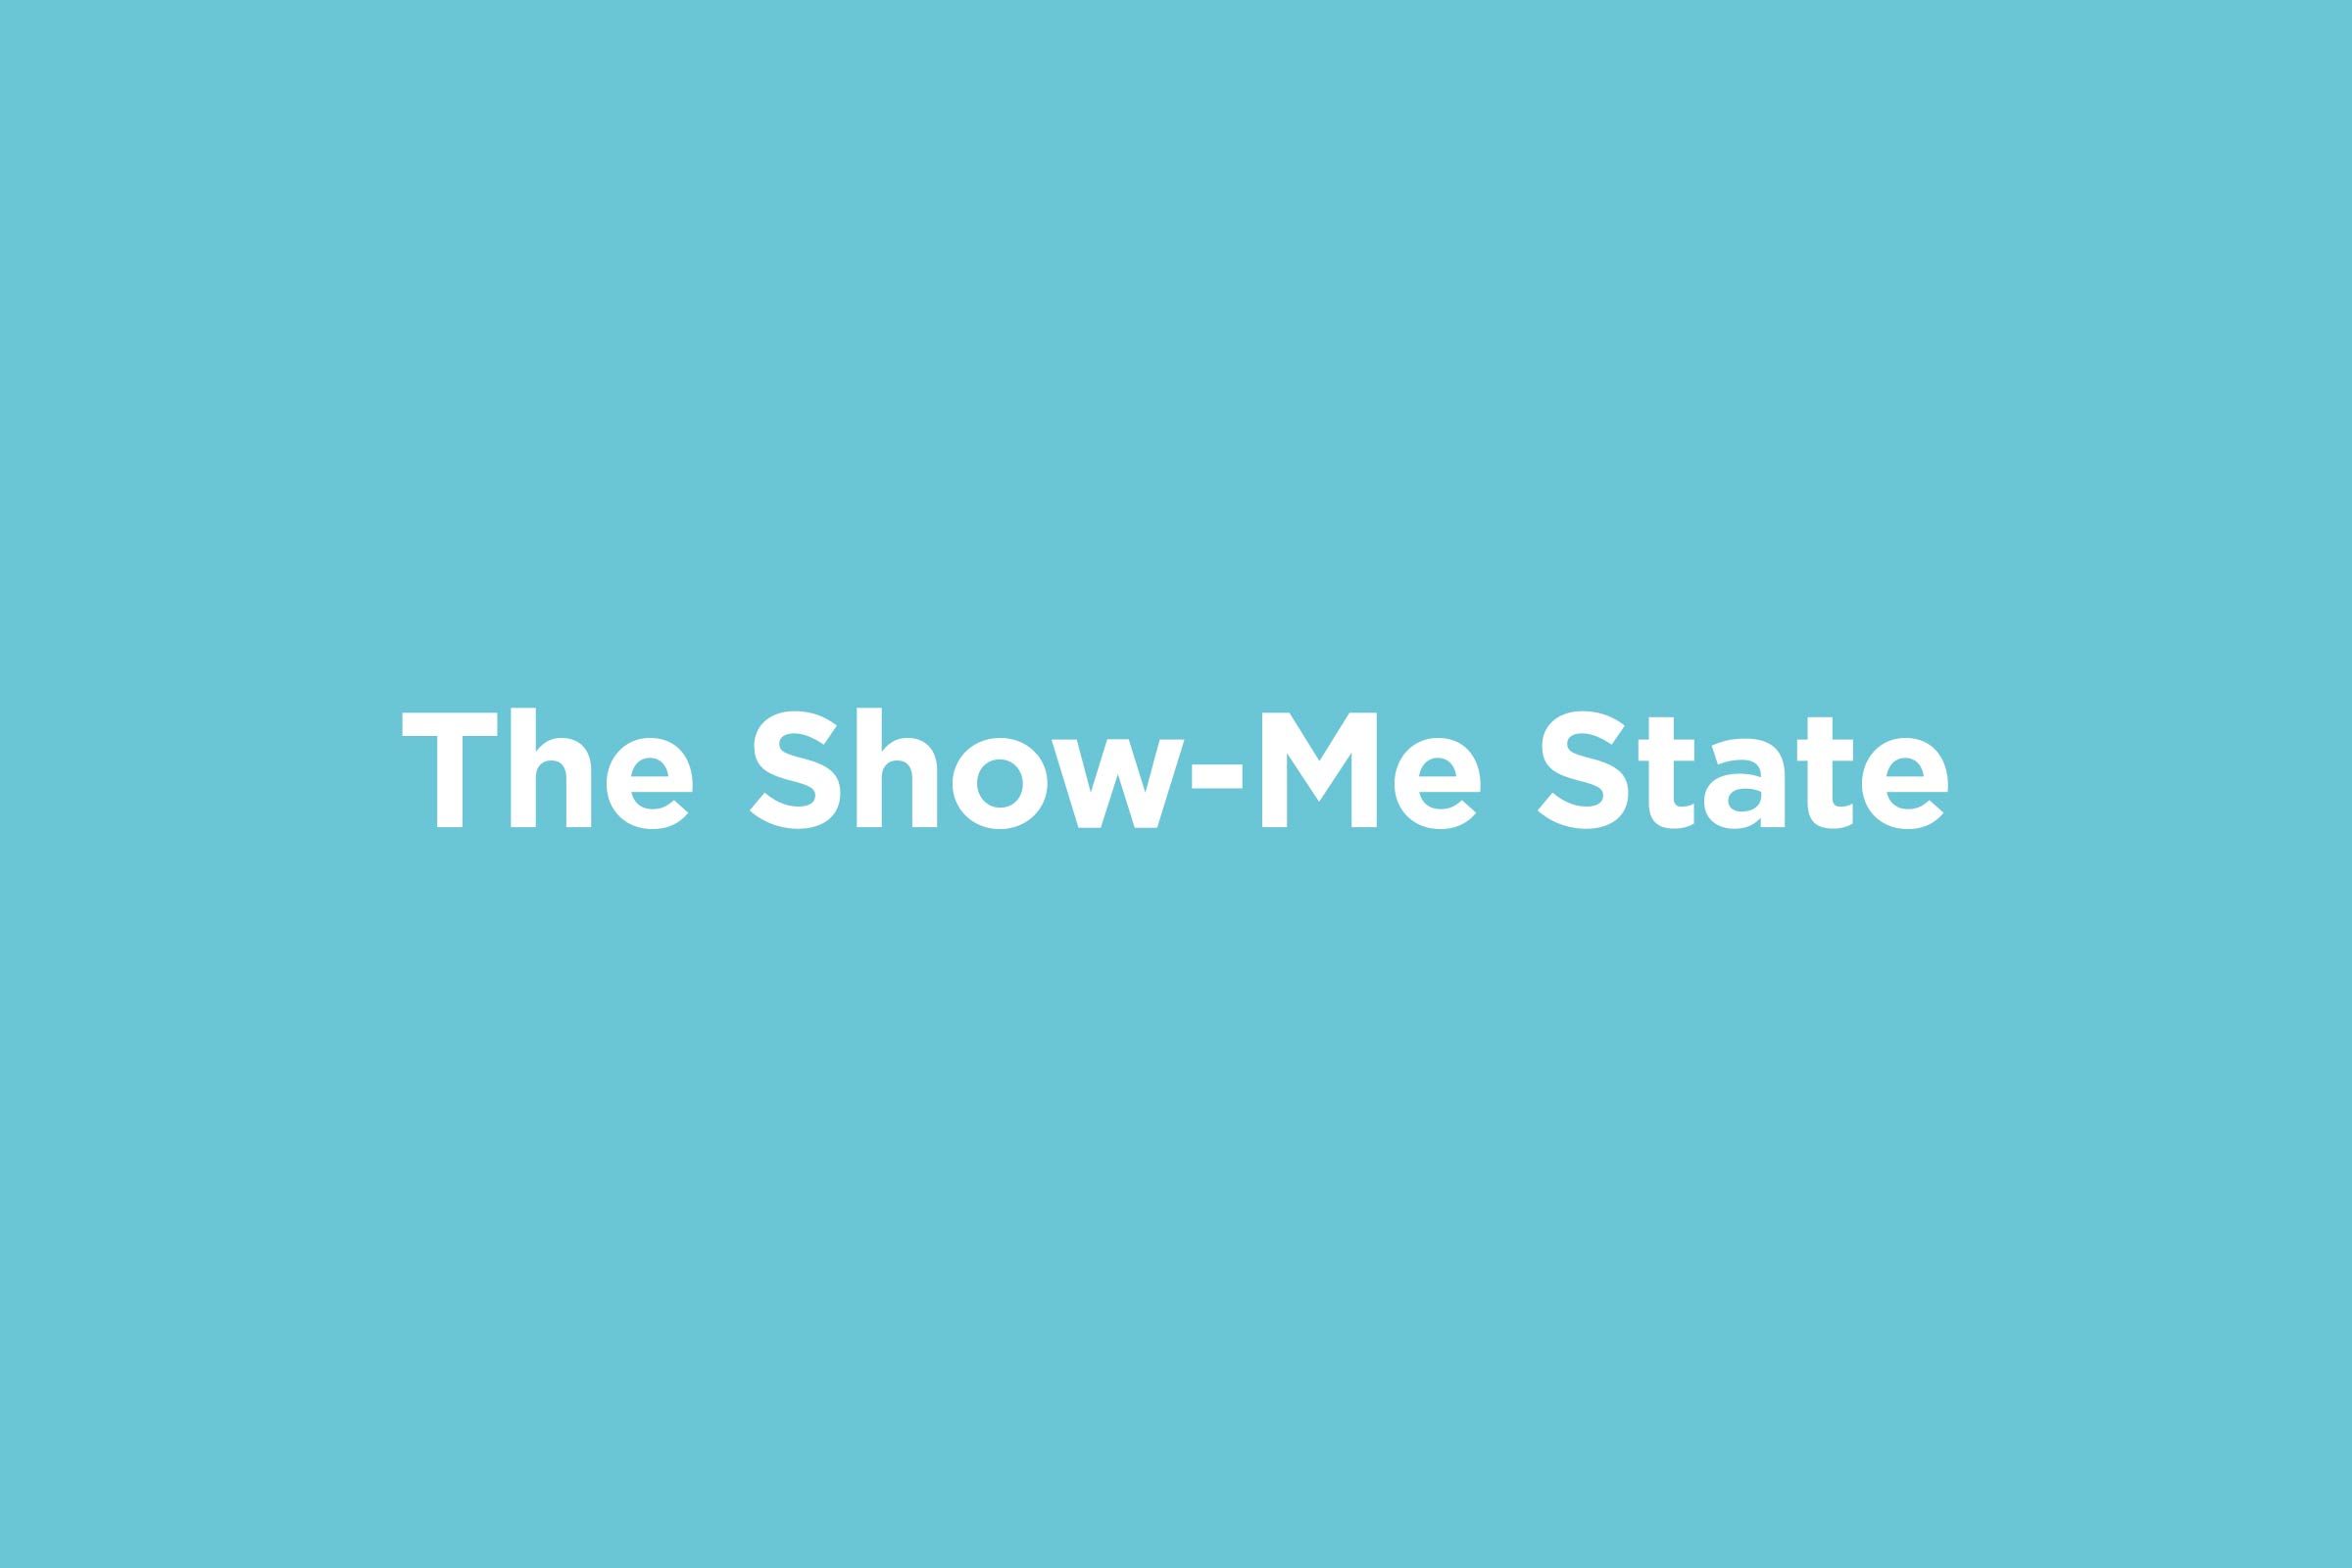 the show-me state